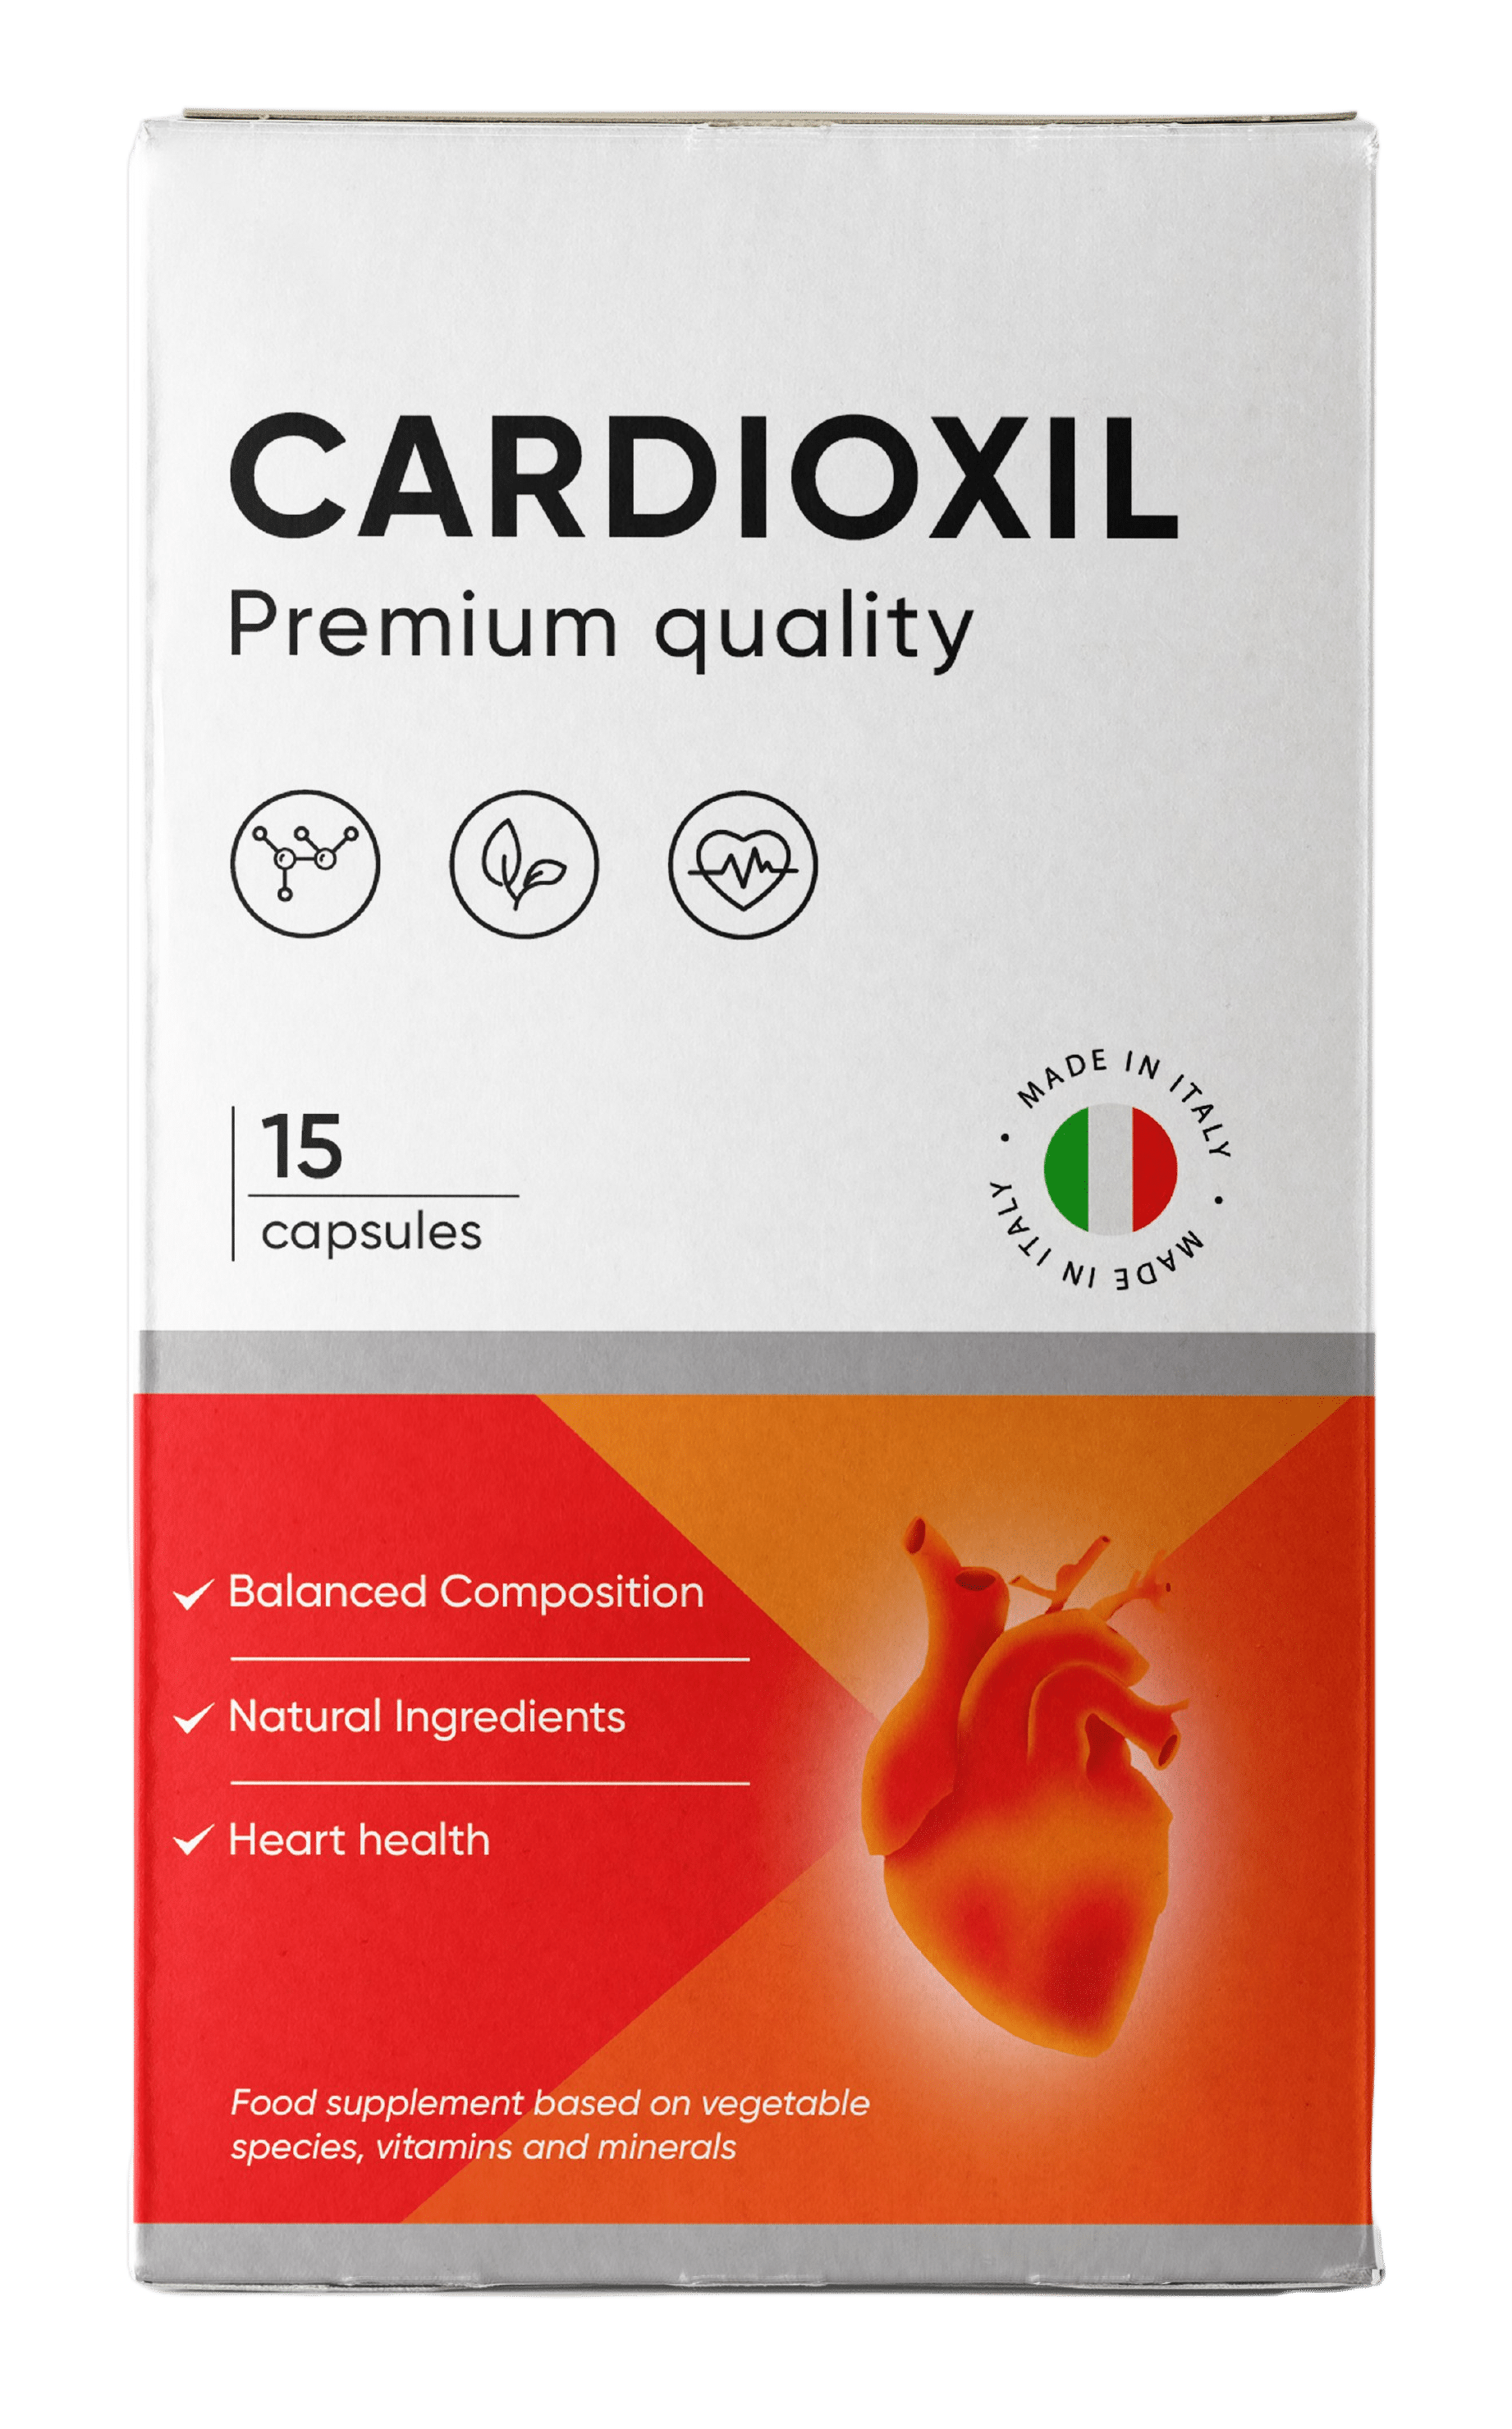 Cardioxil What is it?